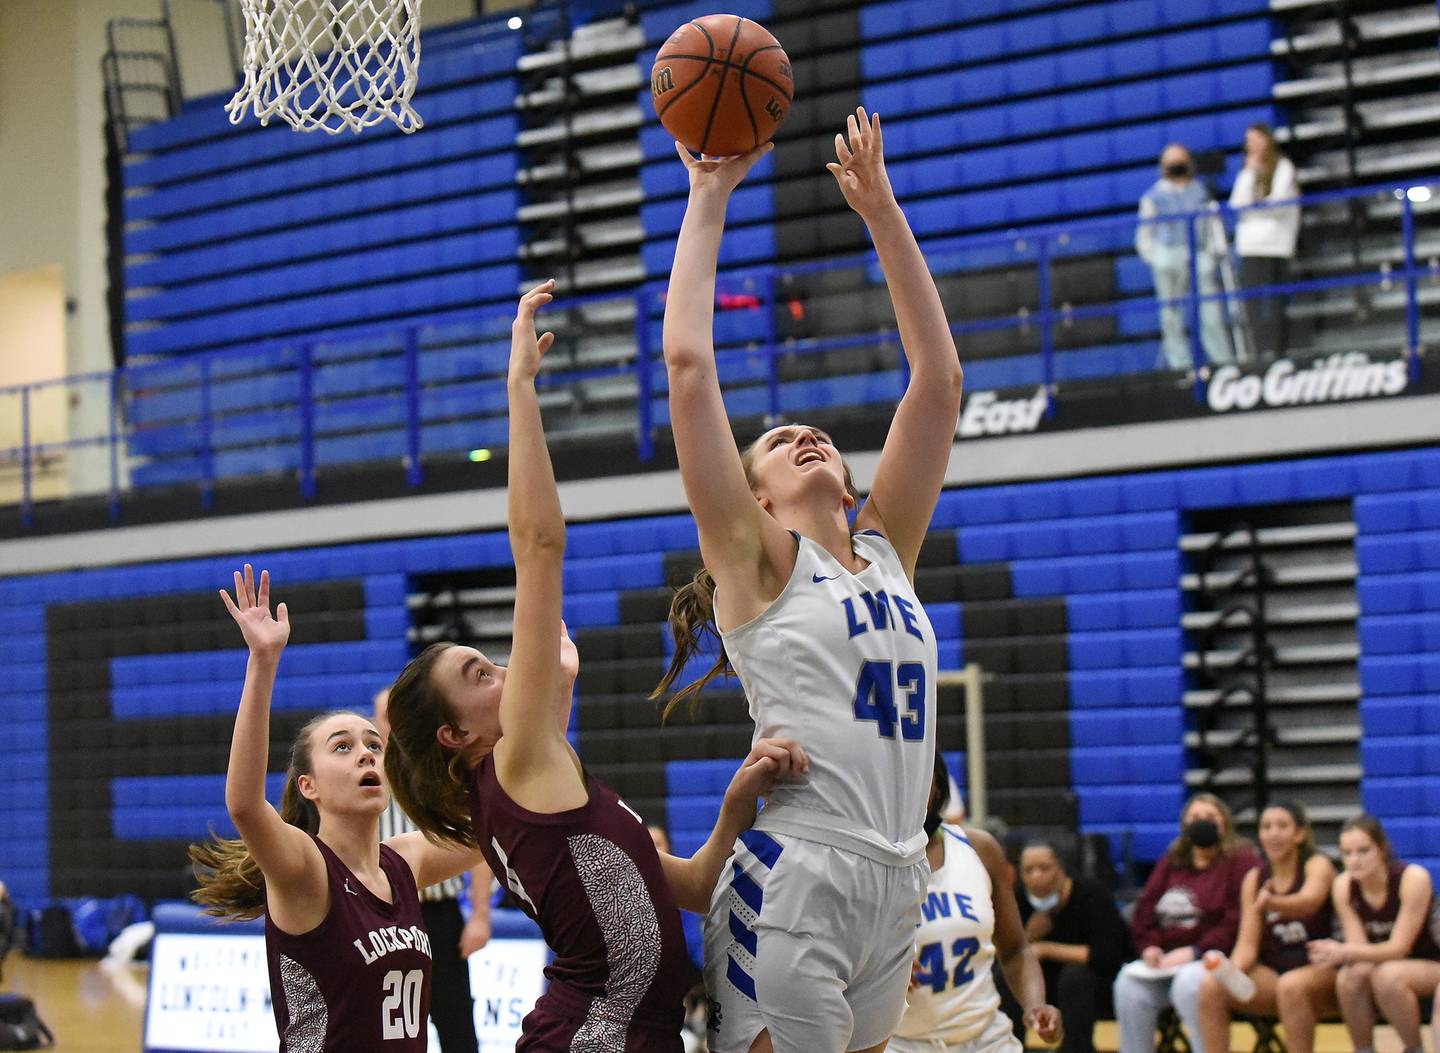 Lincoln-Way East's Hayven Smith (43) puts up a shot against Lockport during a SouthWest Suburban Blue game on Monday, Feb. 14, 2022.